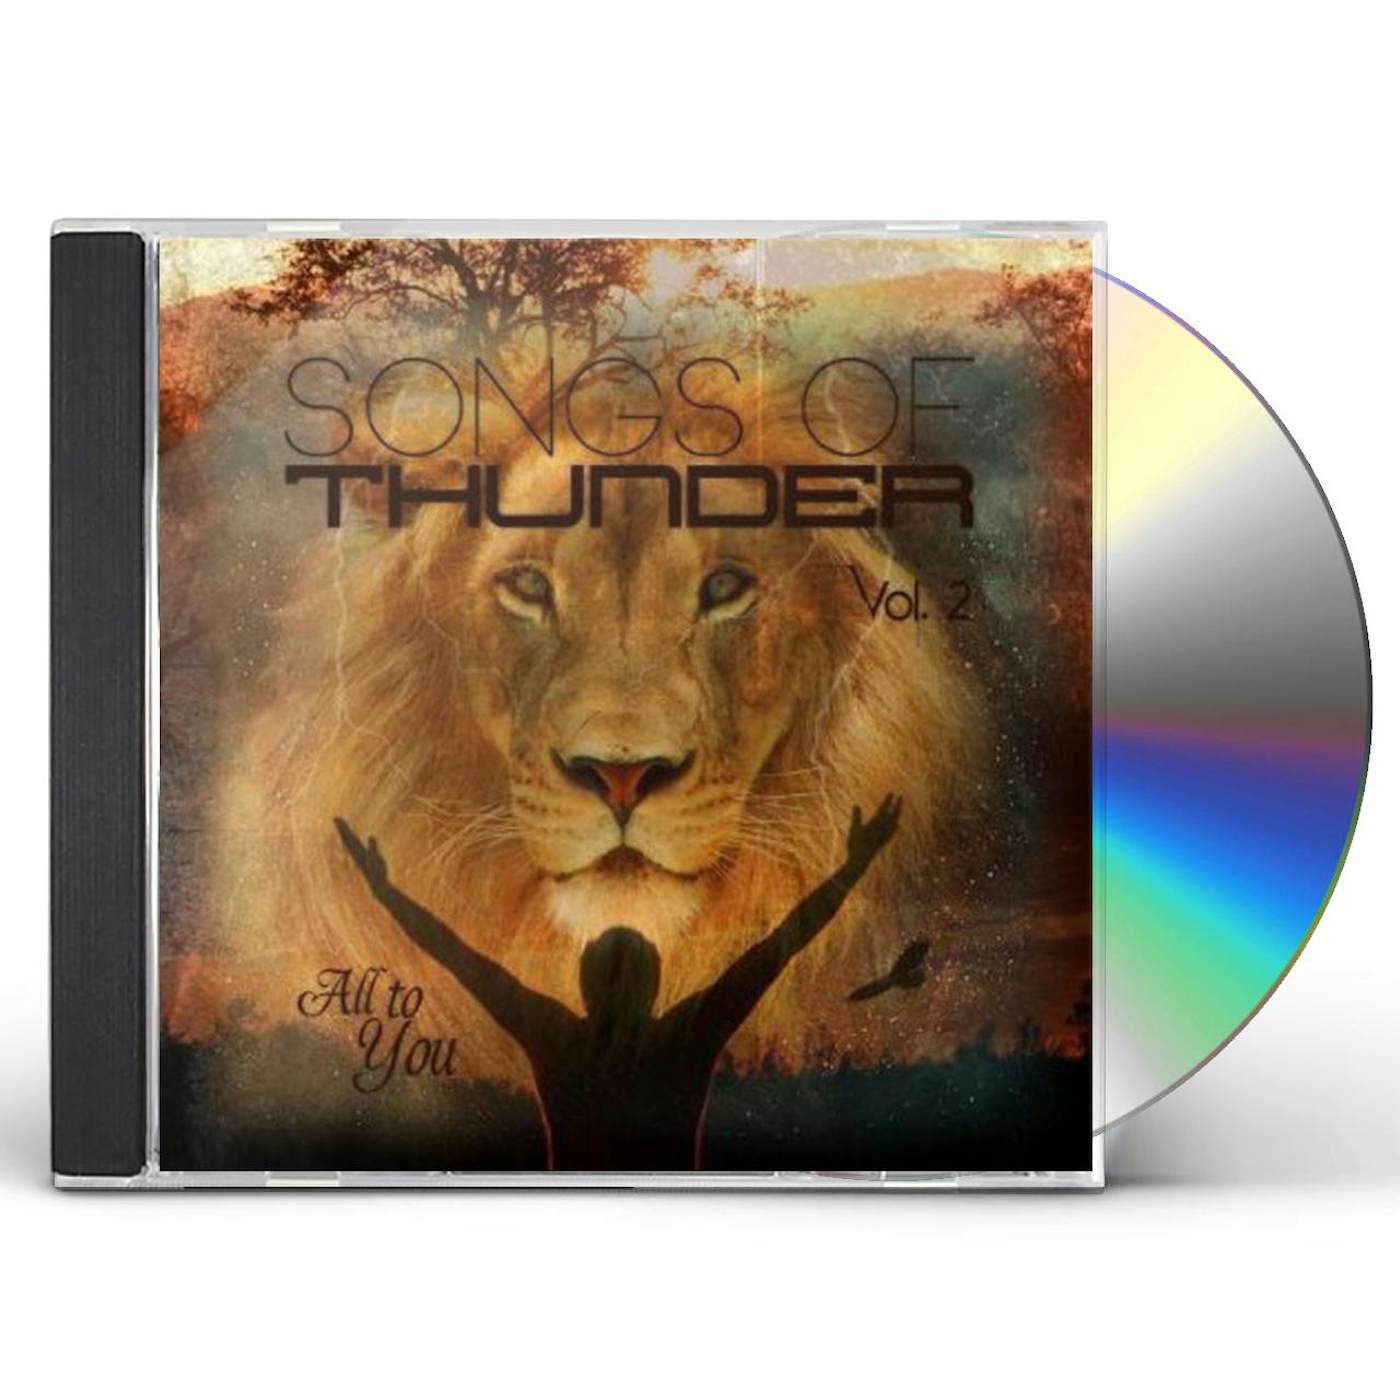 Harvest Sound SONGS OF THUNDER VOL. 2: ALL TO YOU CD